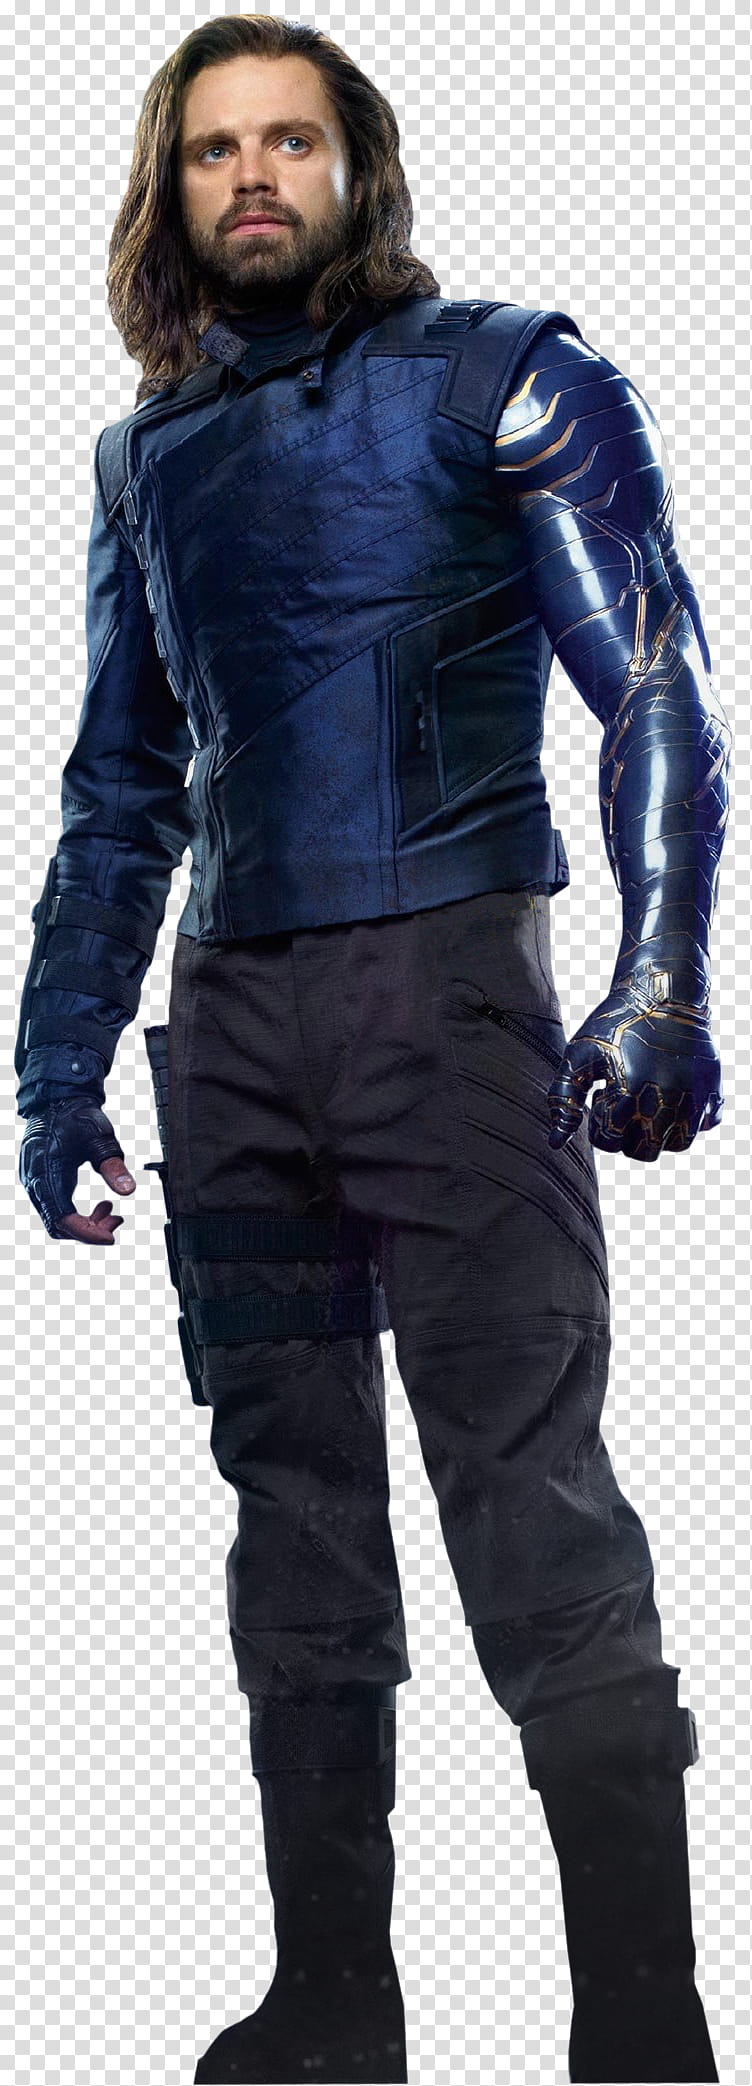 Bucky Barnes x, male movie character in blue top transparent background PNG clipart